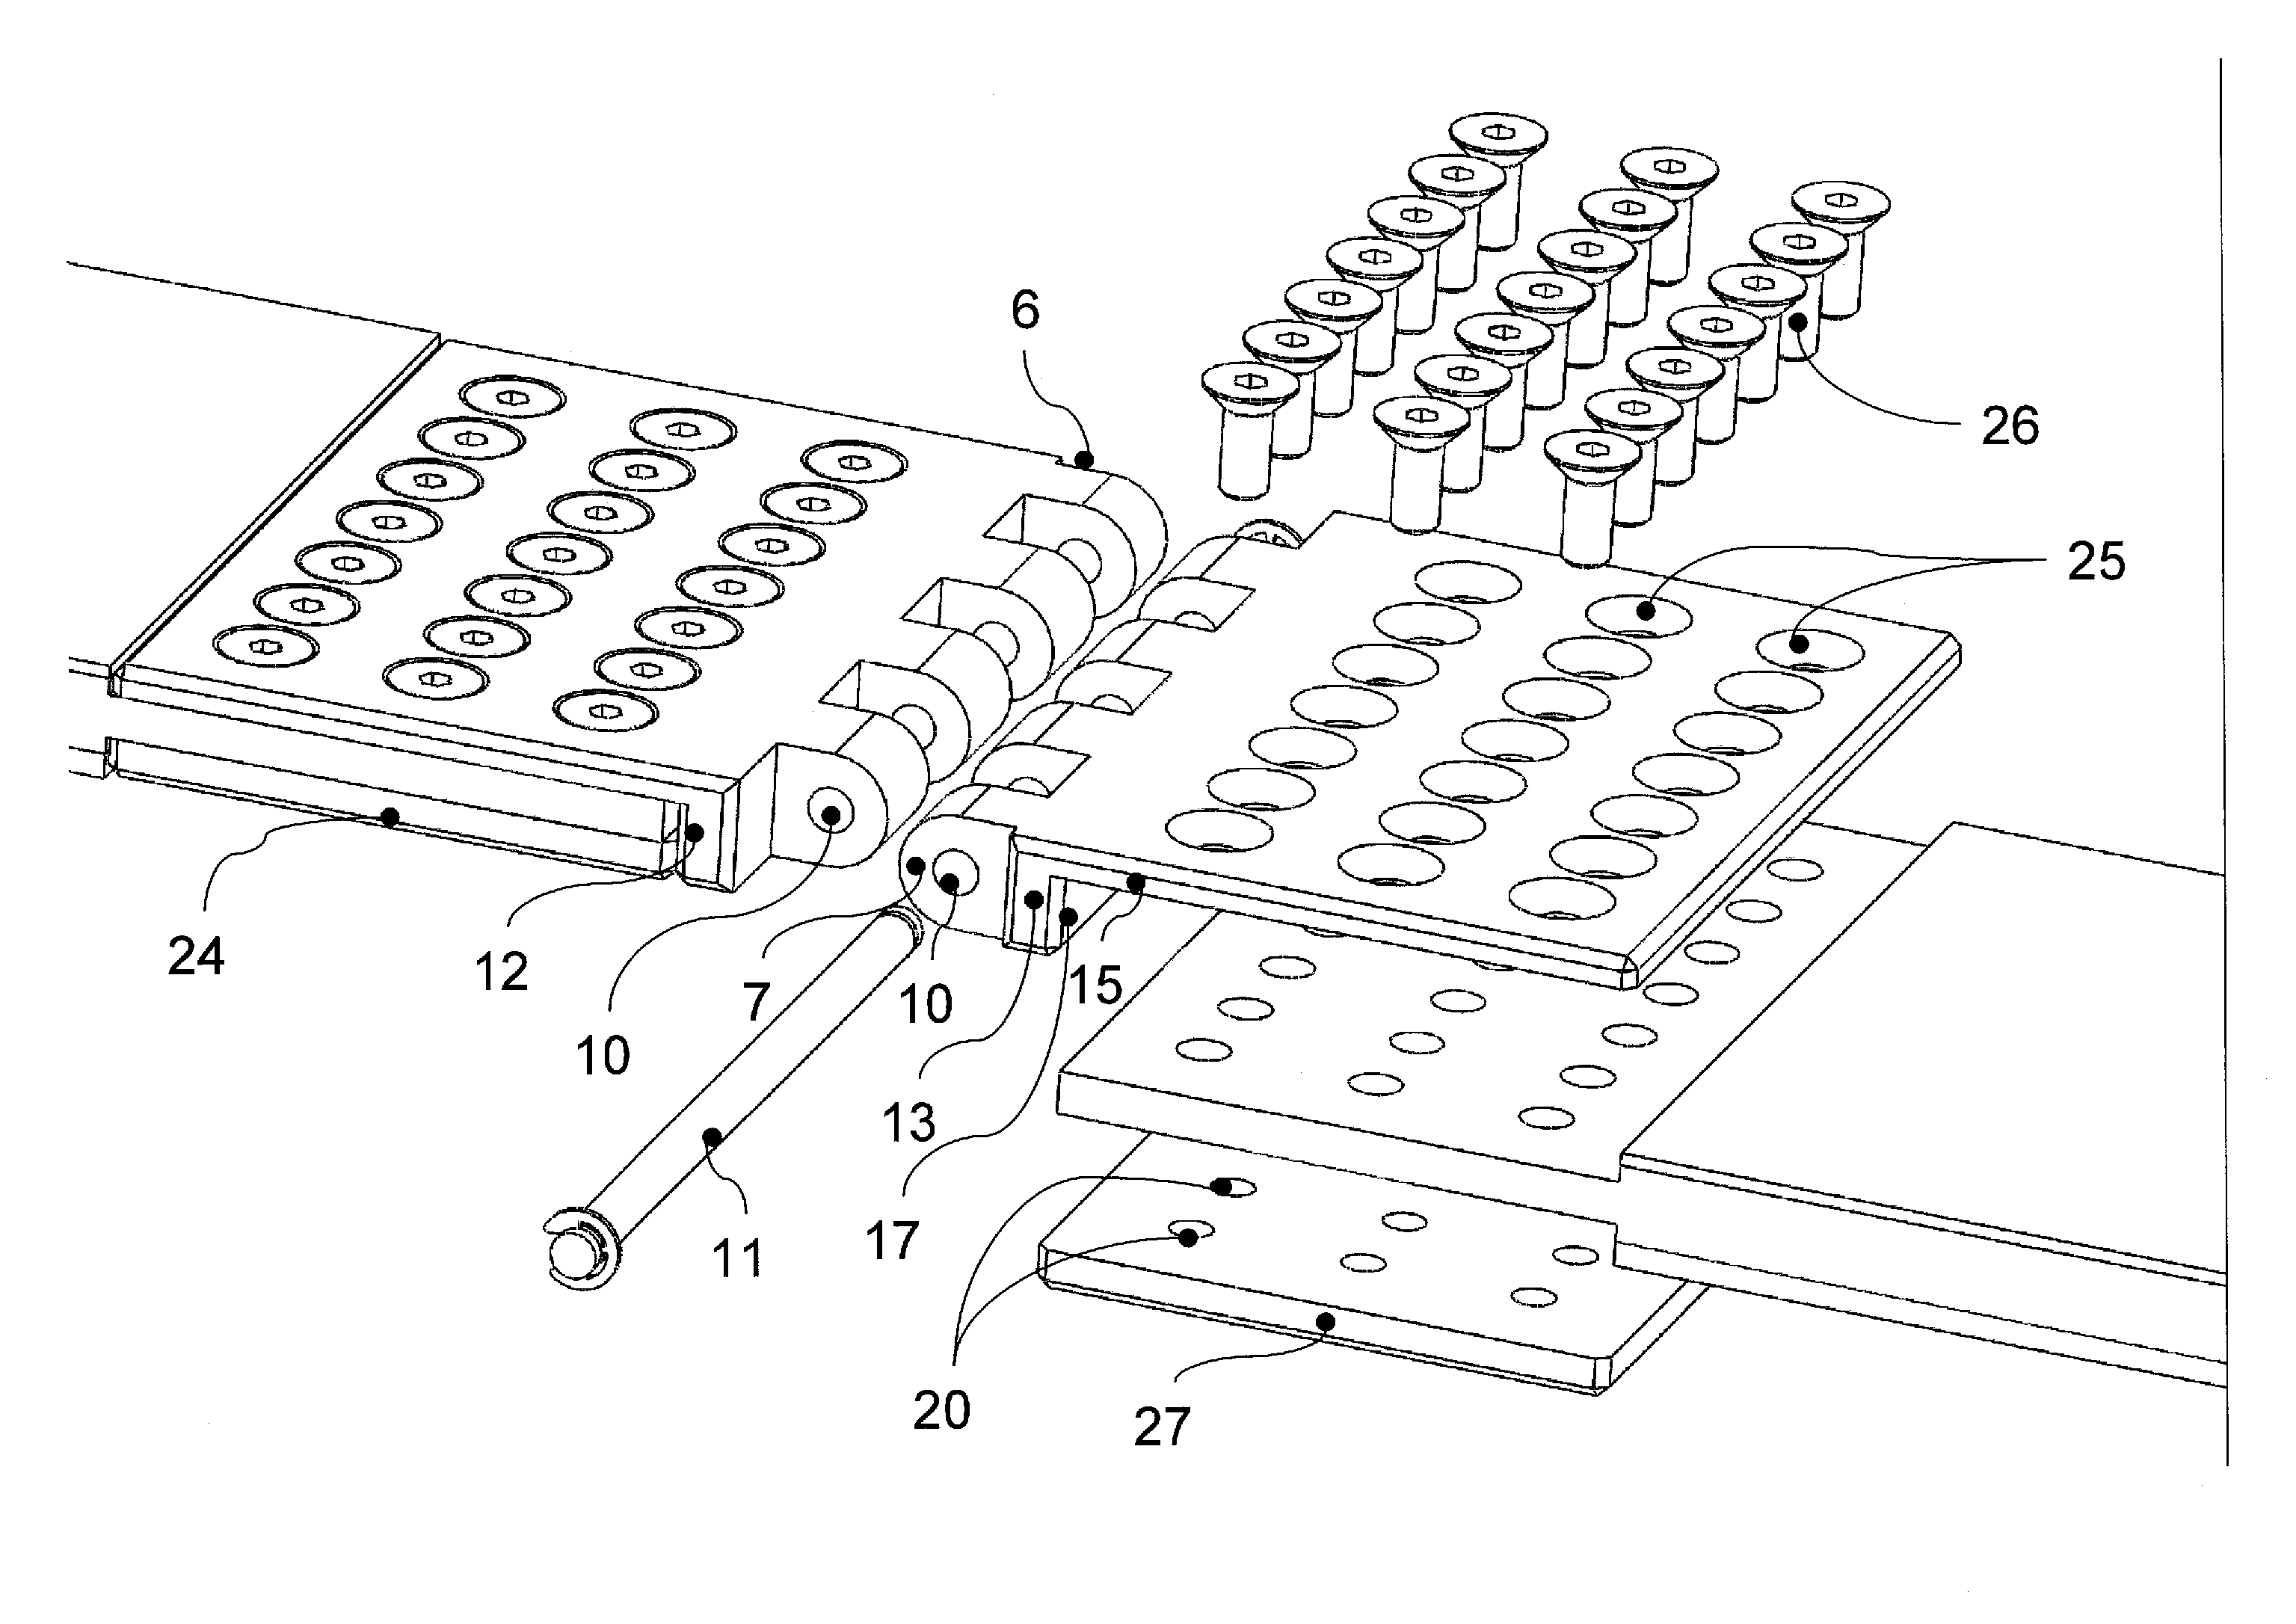 Steel cord conveyer belt with a connecting hinge for coupling two belt ends